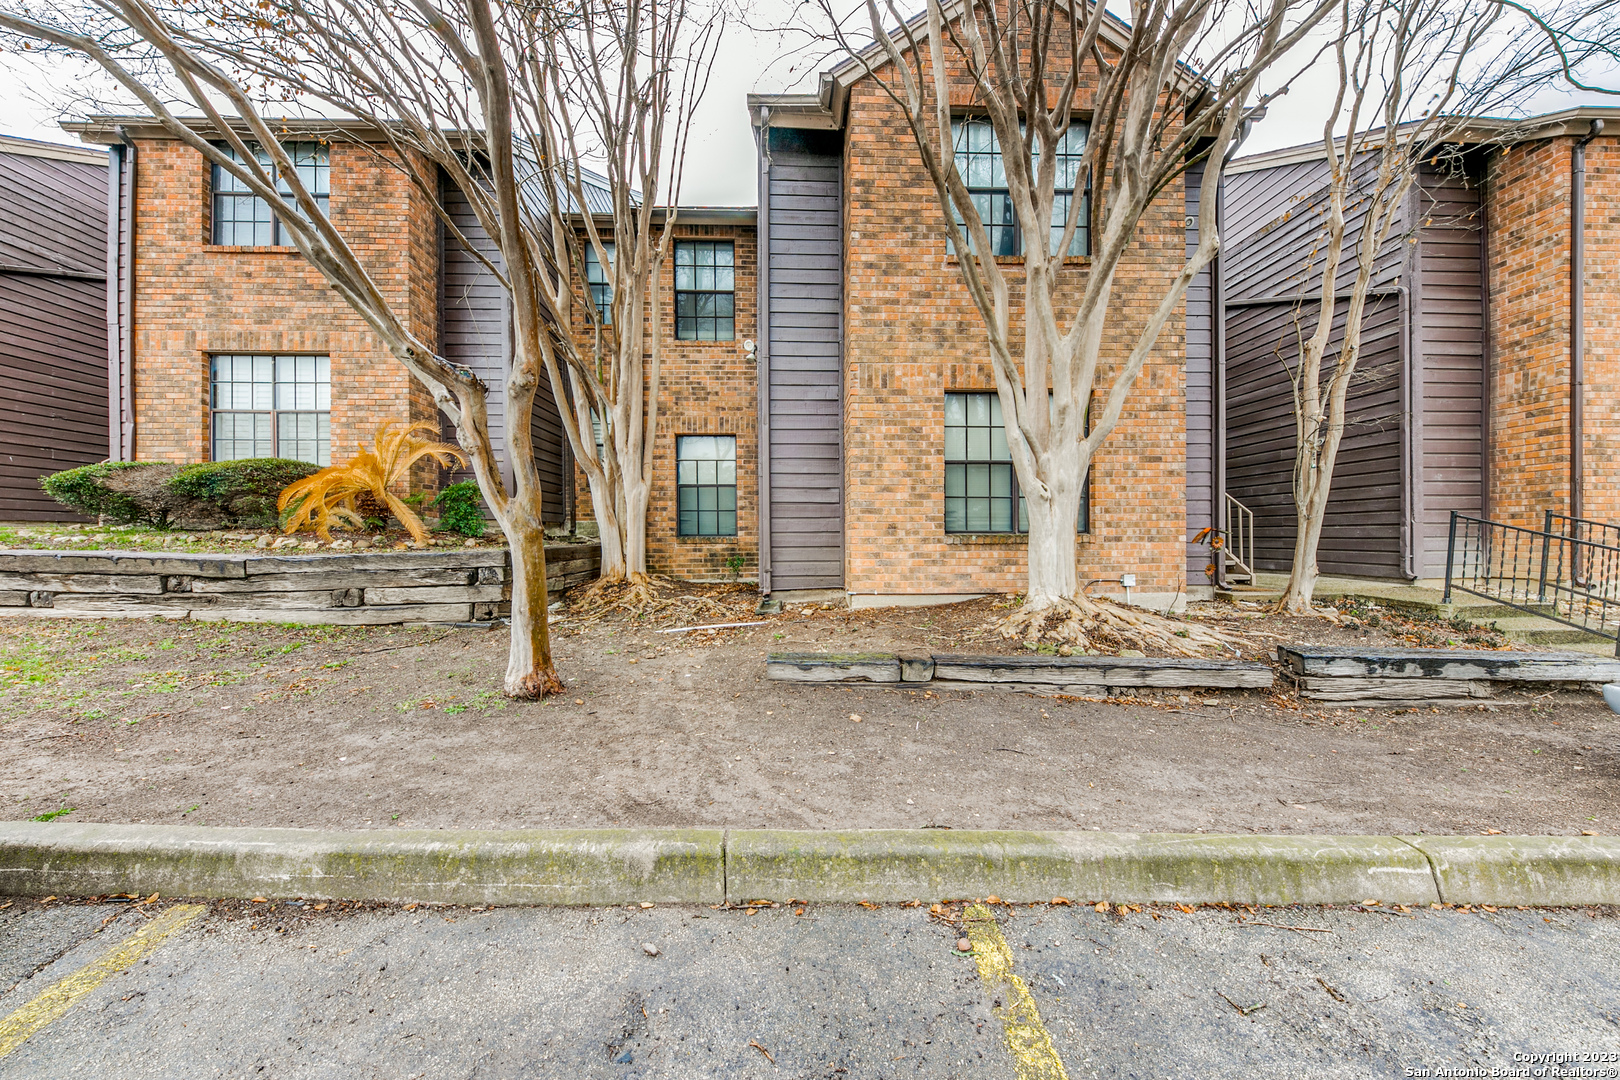 2 bedroom to 2 bath moderately conserved condominium nested in SyglasHill. This condo has a one-car carport reserved and the back patio faces the second pool. Schedule a showing today